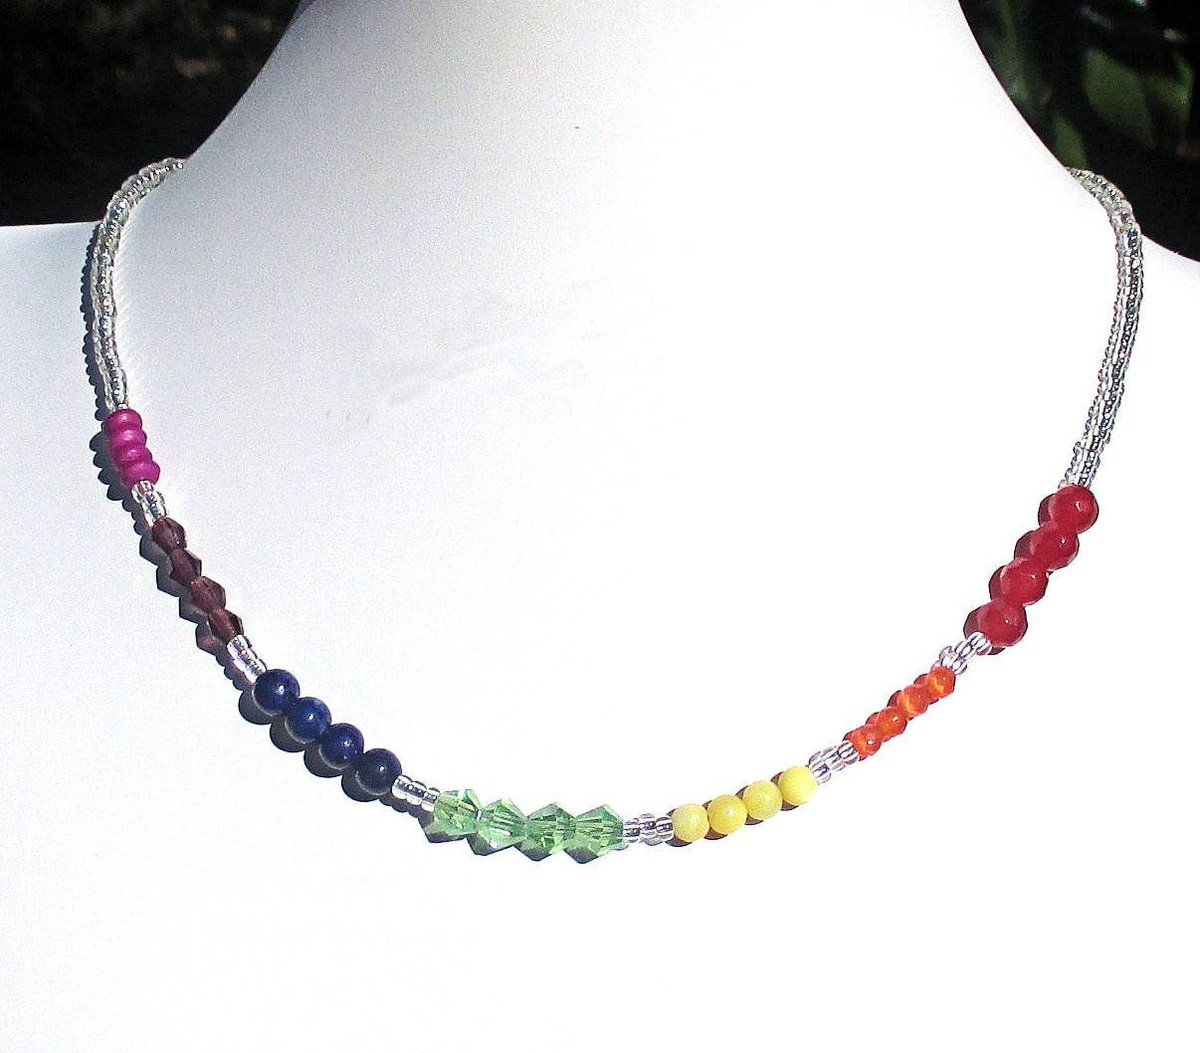 Chakra Colors Necklace with Agate, Lapis, and Jade, 16-18 in. Handcrafted. Free USA shipping.

etsy.me/3e0Azee 

#jewelrybyscotti #chakranecklace